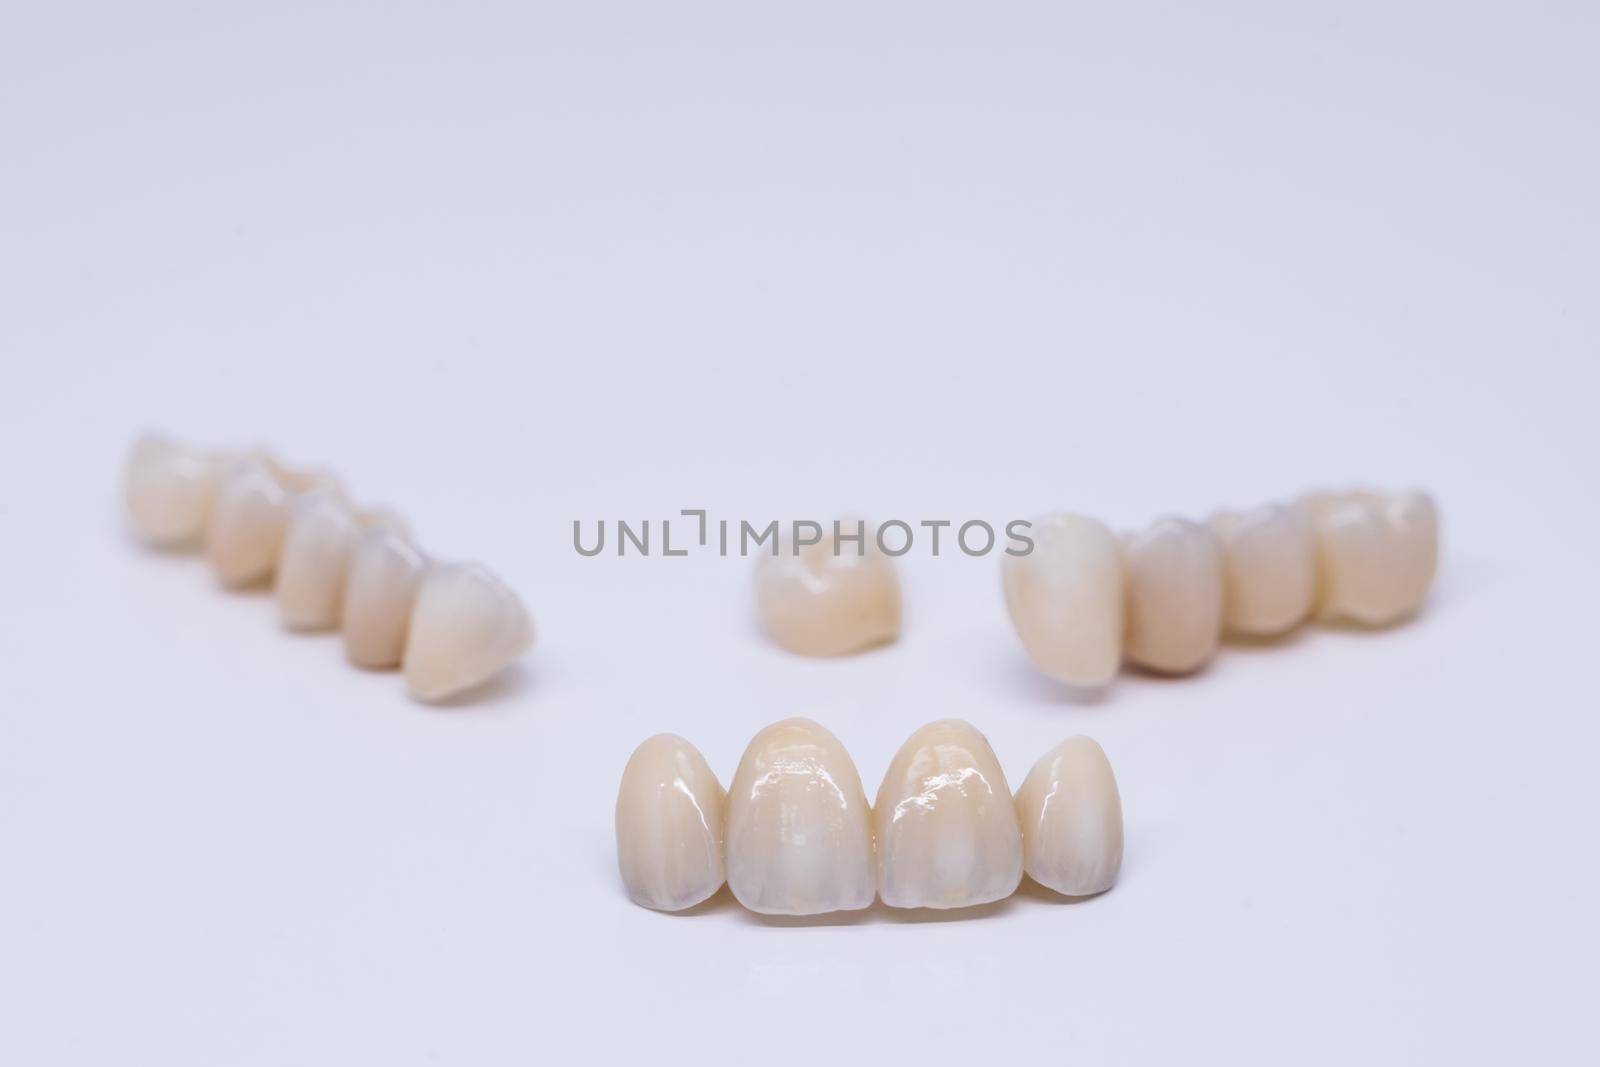 Metal Free Ceramic Dental Crowns. Ceramic zirconium in final version. Staining and glazing. Precision design and high quality materials by uflypro